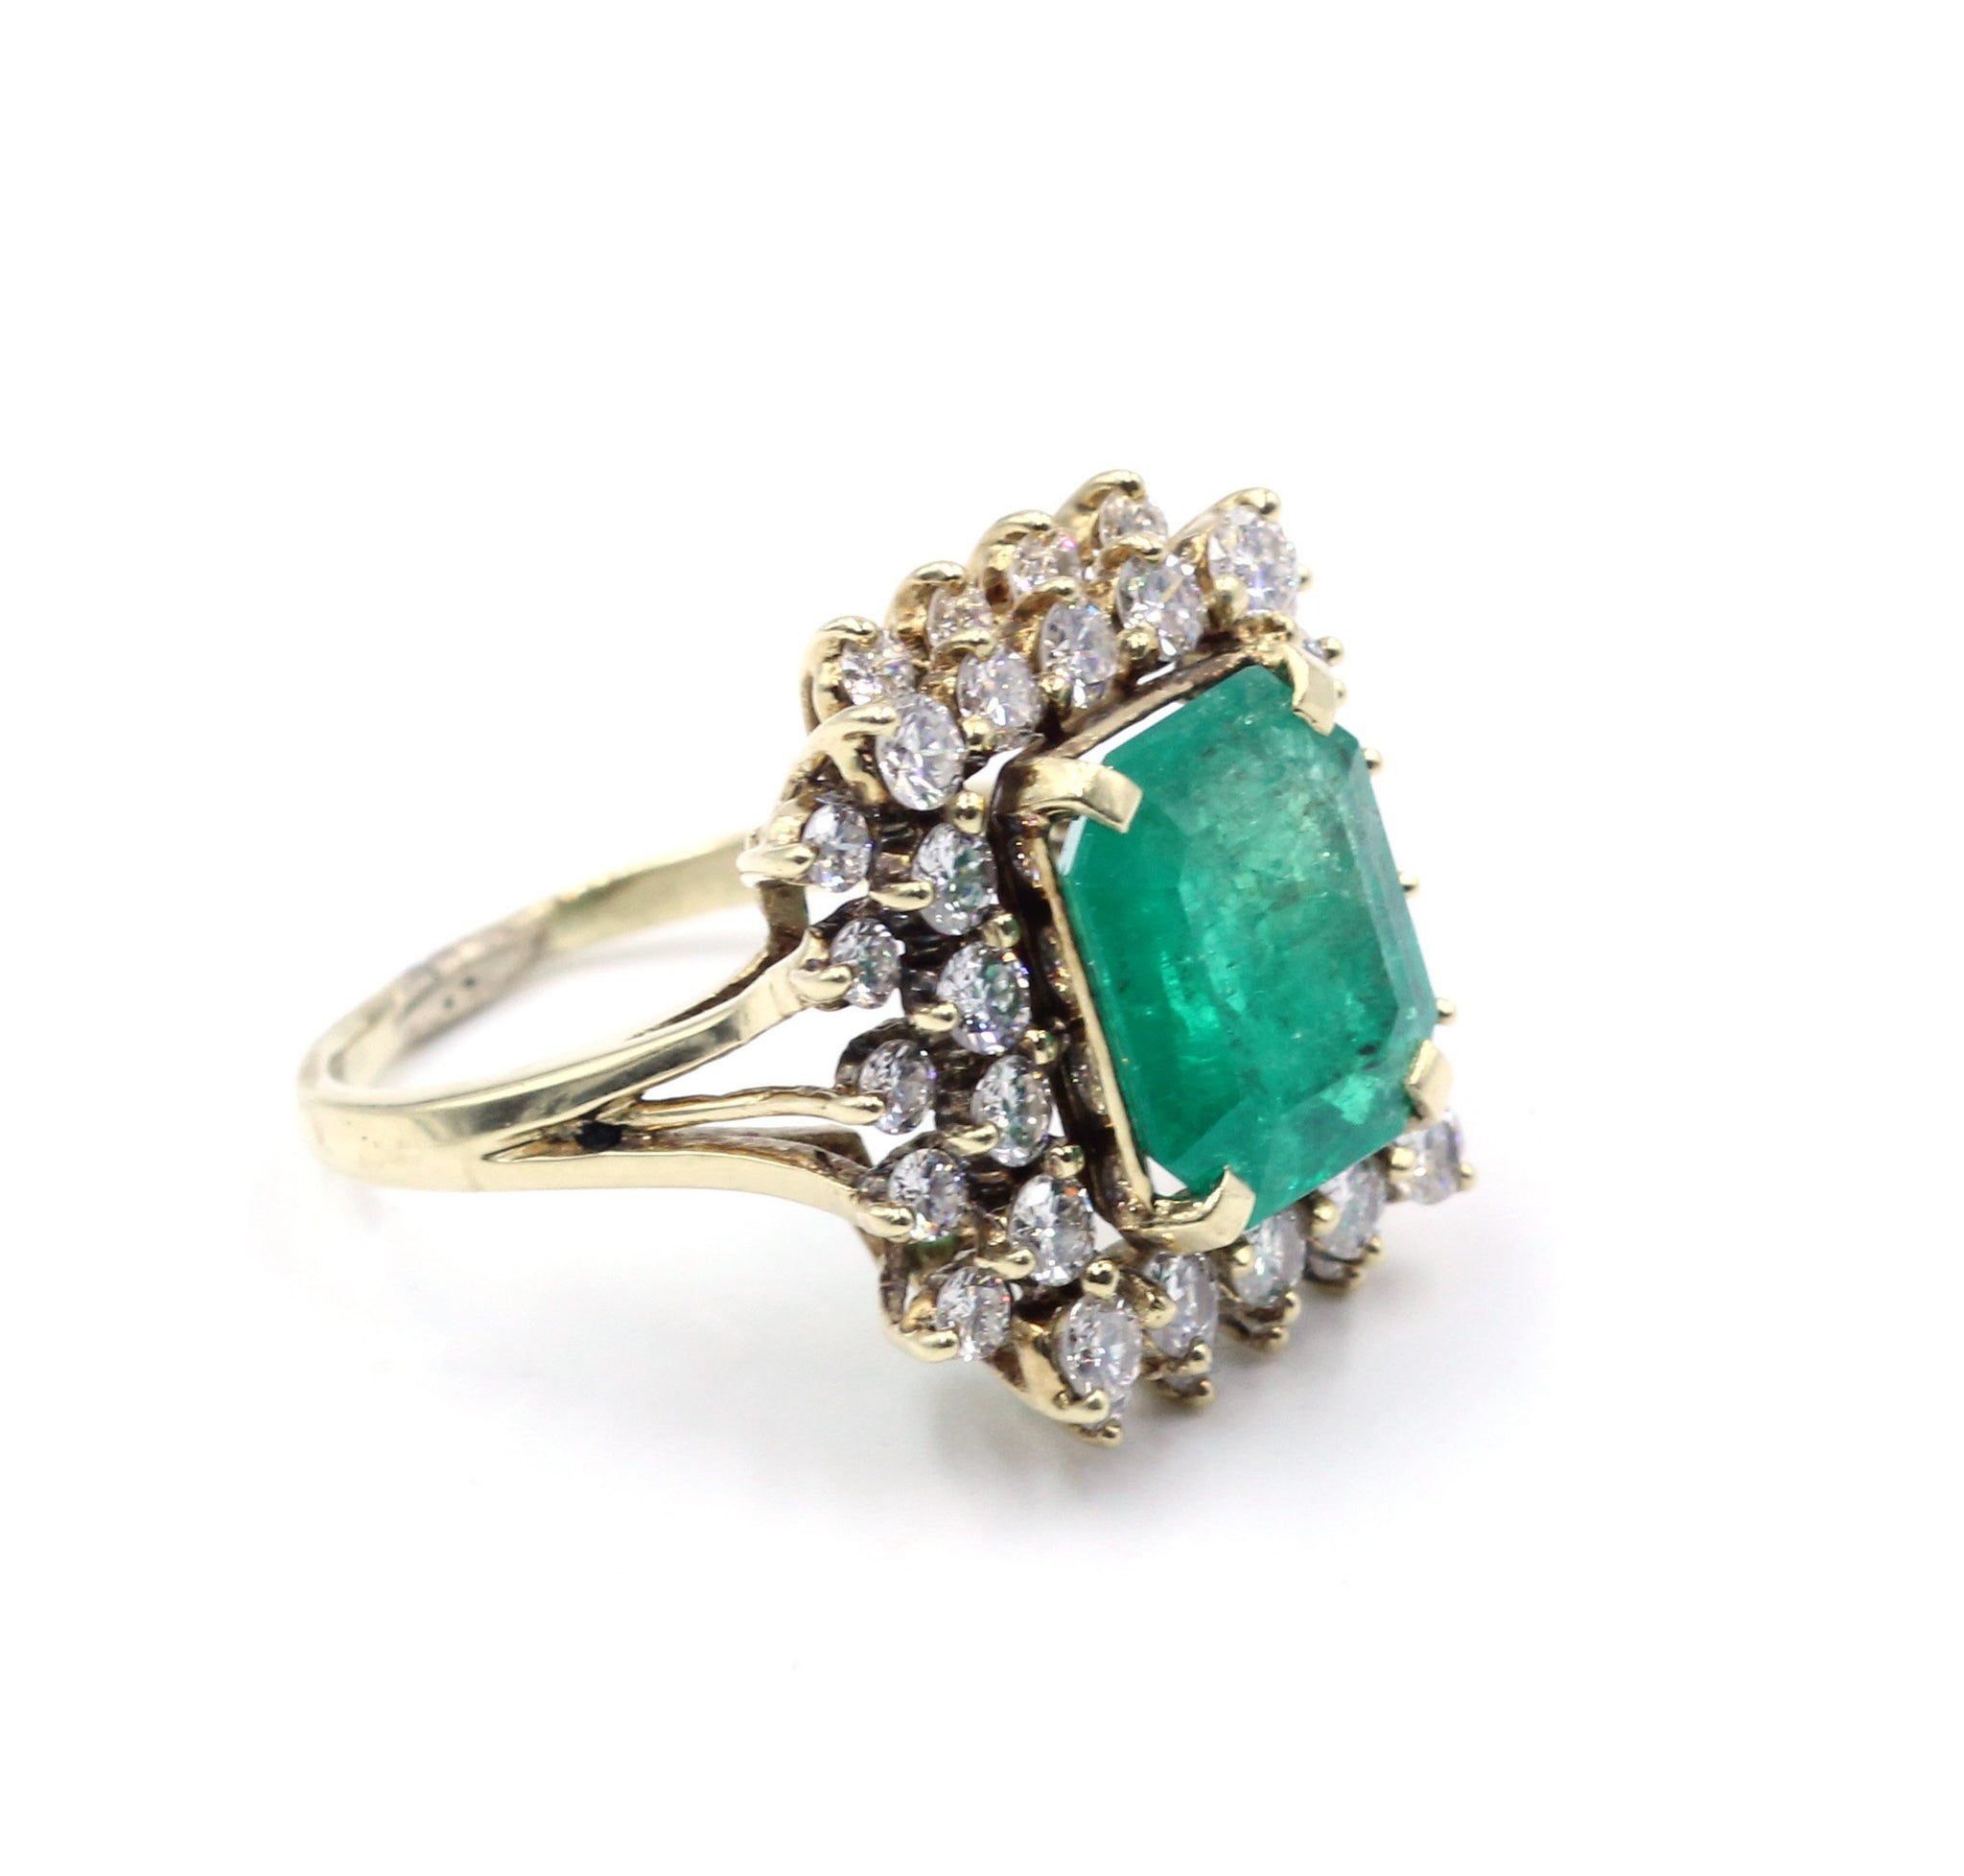 Vintage Emerald and Diamond Ring, SALE, SOLD